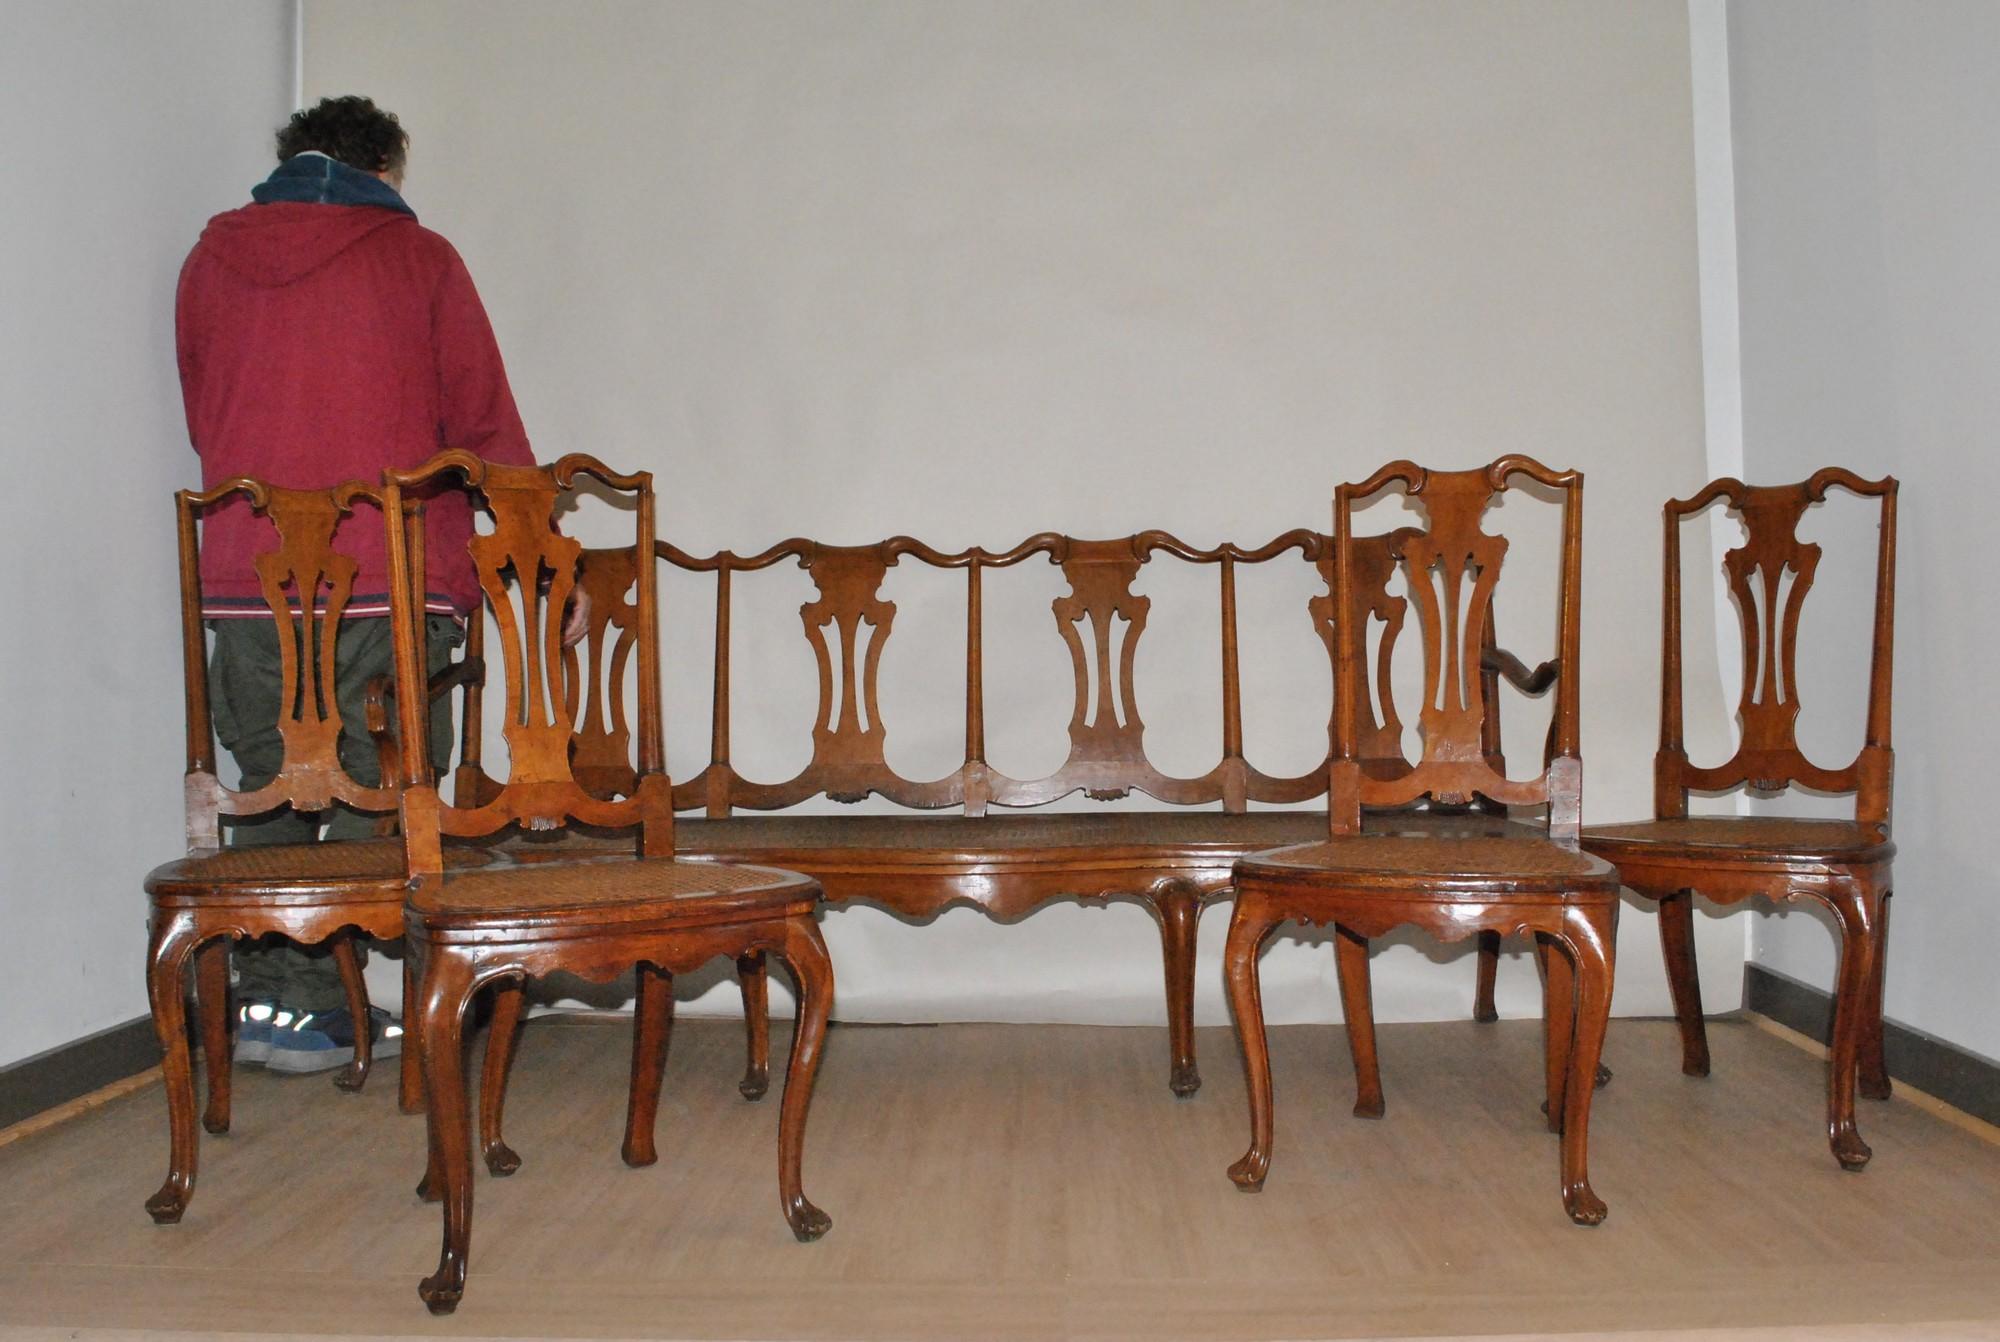 Salon set consisting of a 4-seater bench and 4 chairs, in carved walnut and caning

Very elegant Venetian work from the 18th century

The caning is in perfect condition, some old restorations (including 1 front foot and 1 back foot of the